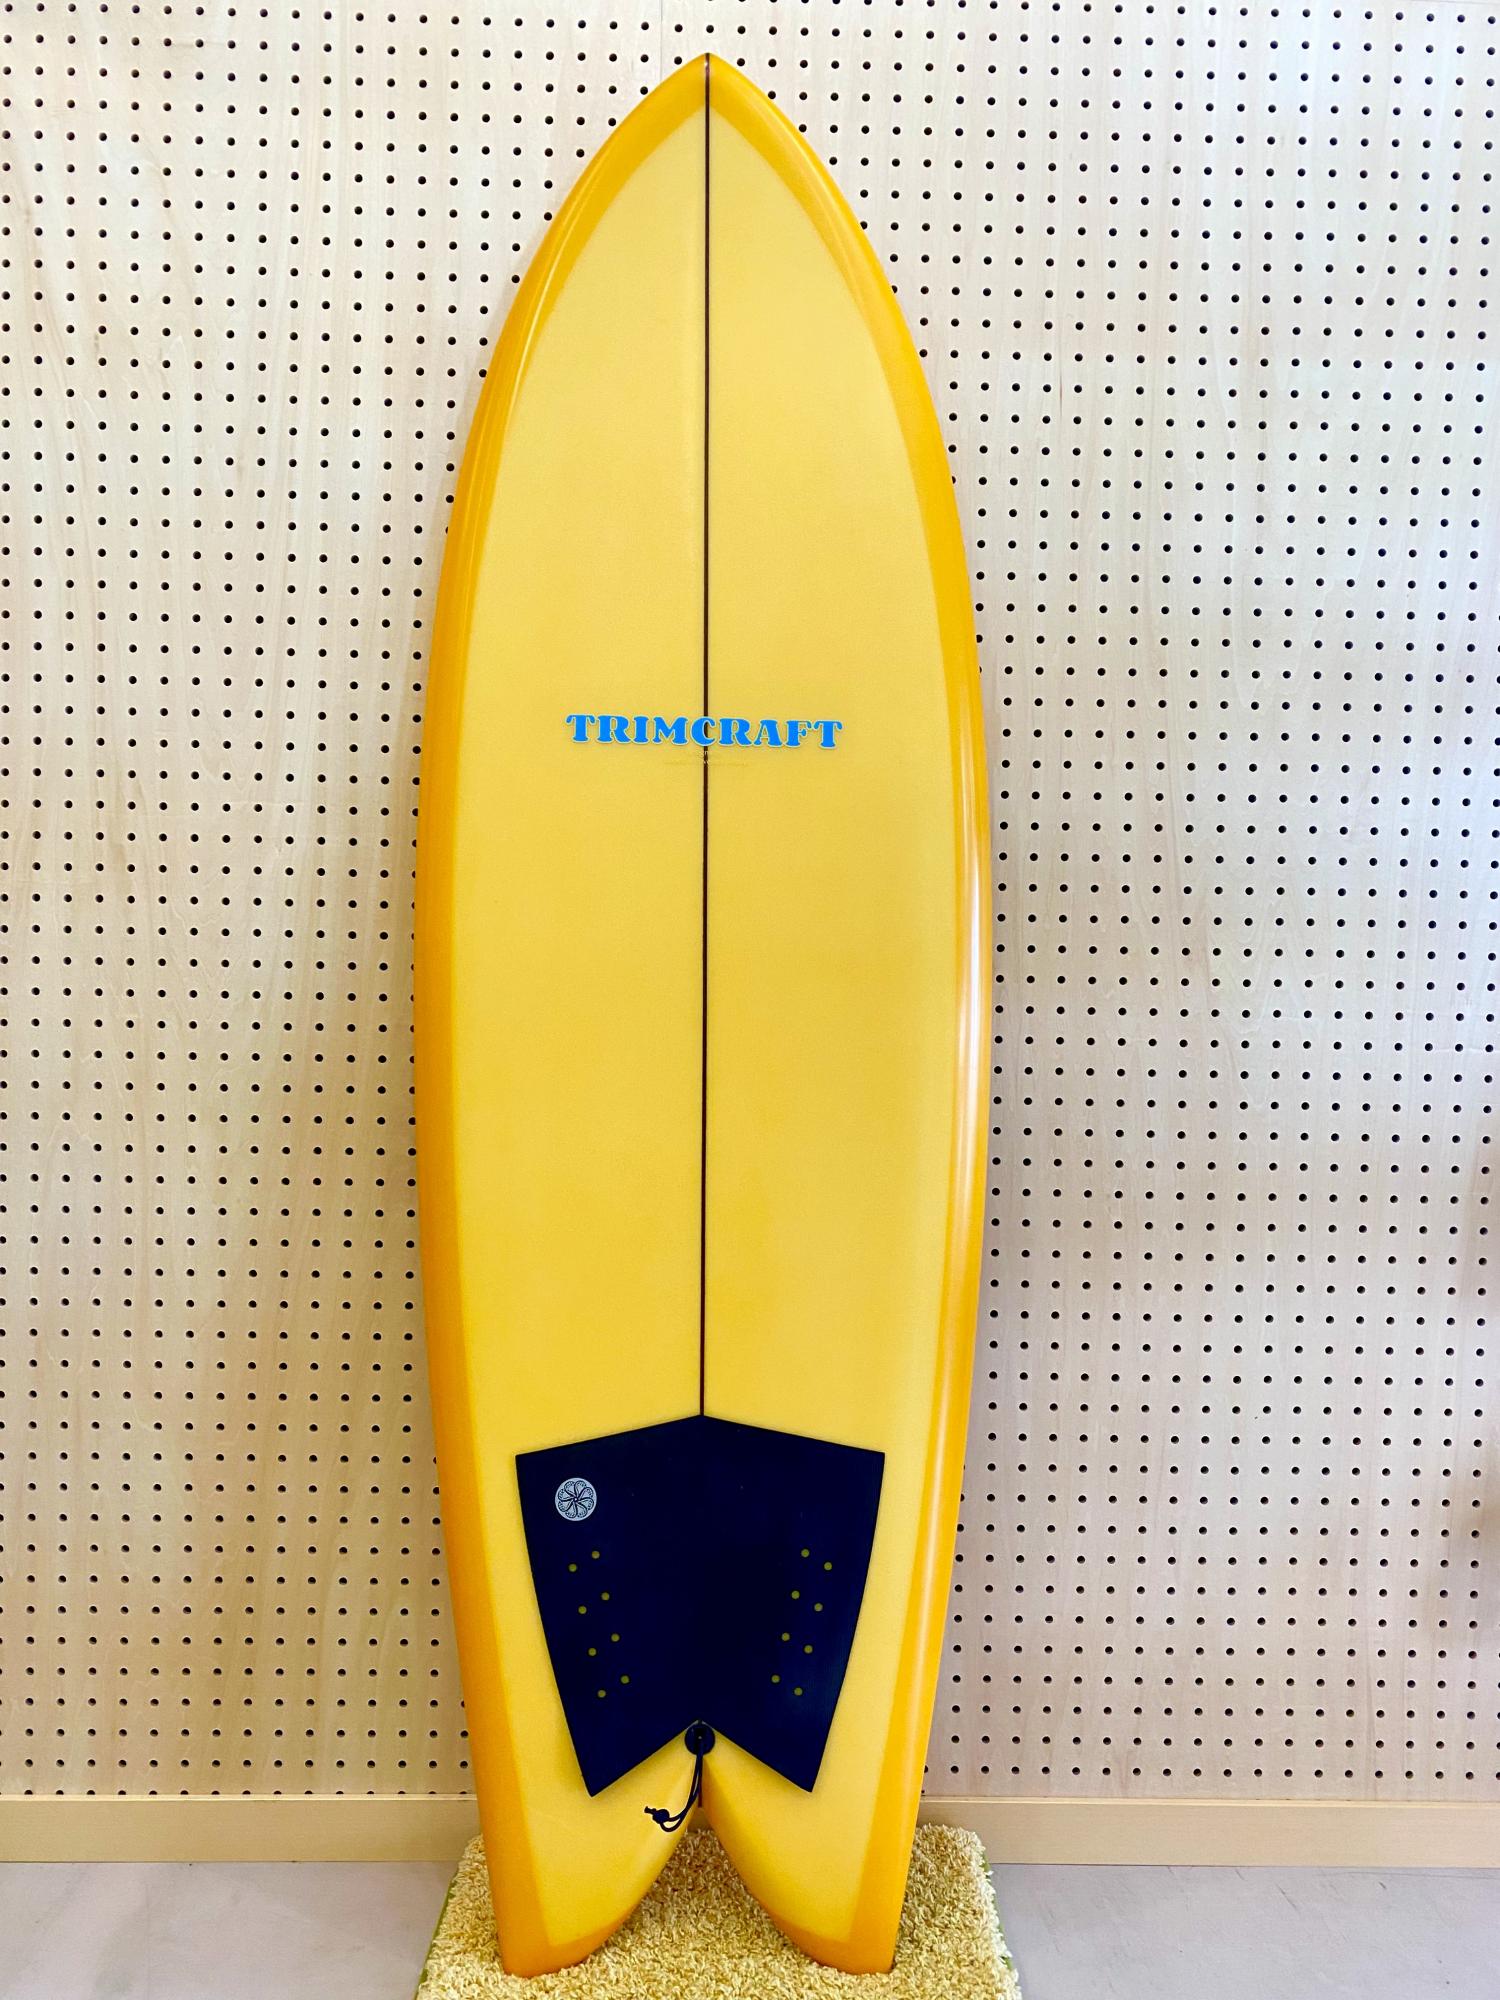 USED (Pavel Fish 5.8 TRIMCRAFT SURFBOARDS)